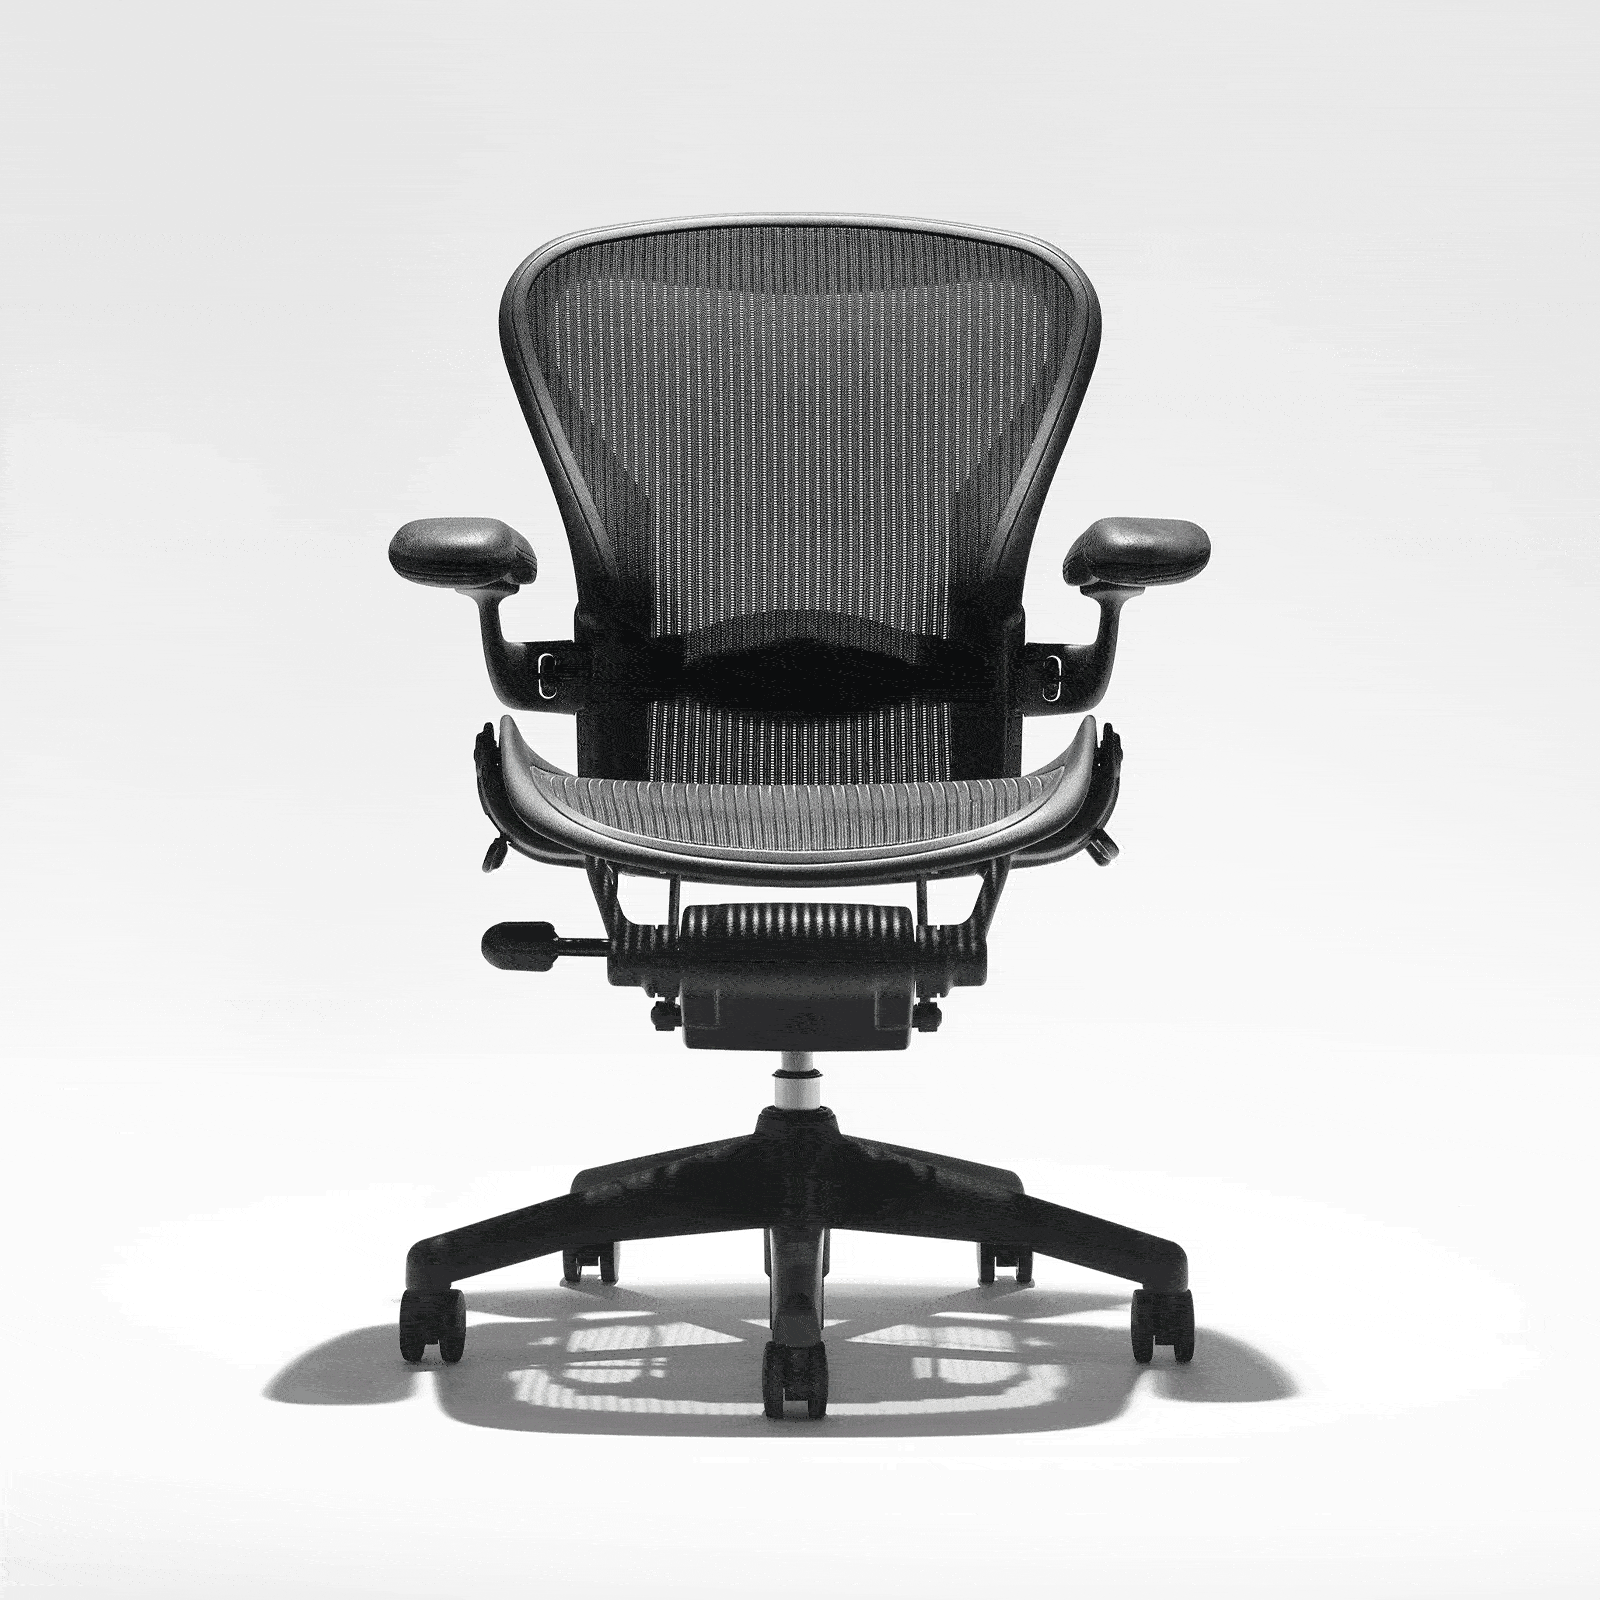 Buying A Used Office Chair May Cost You